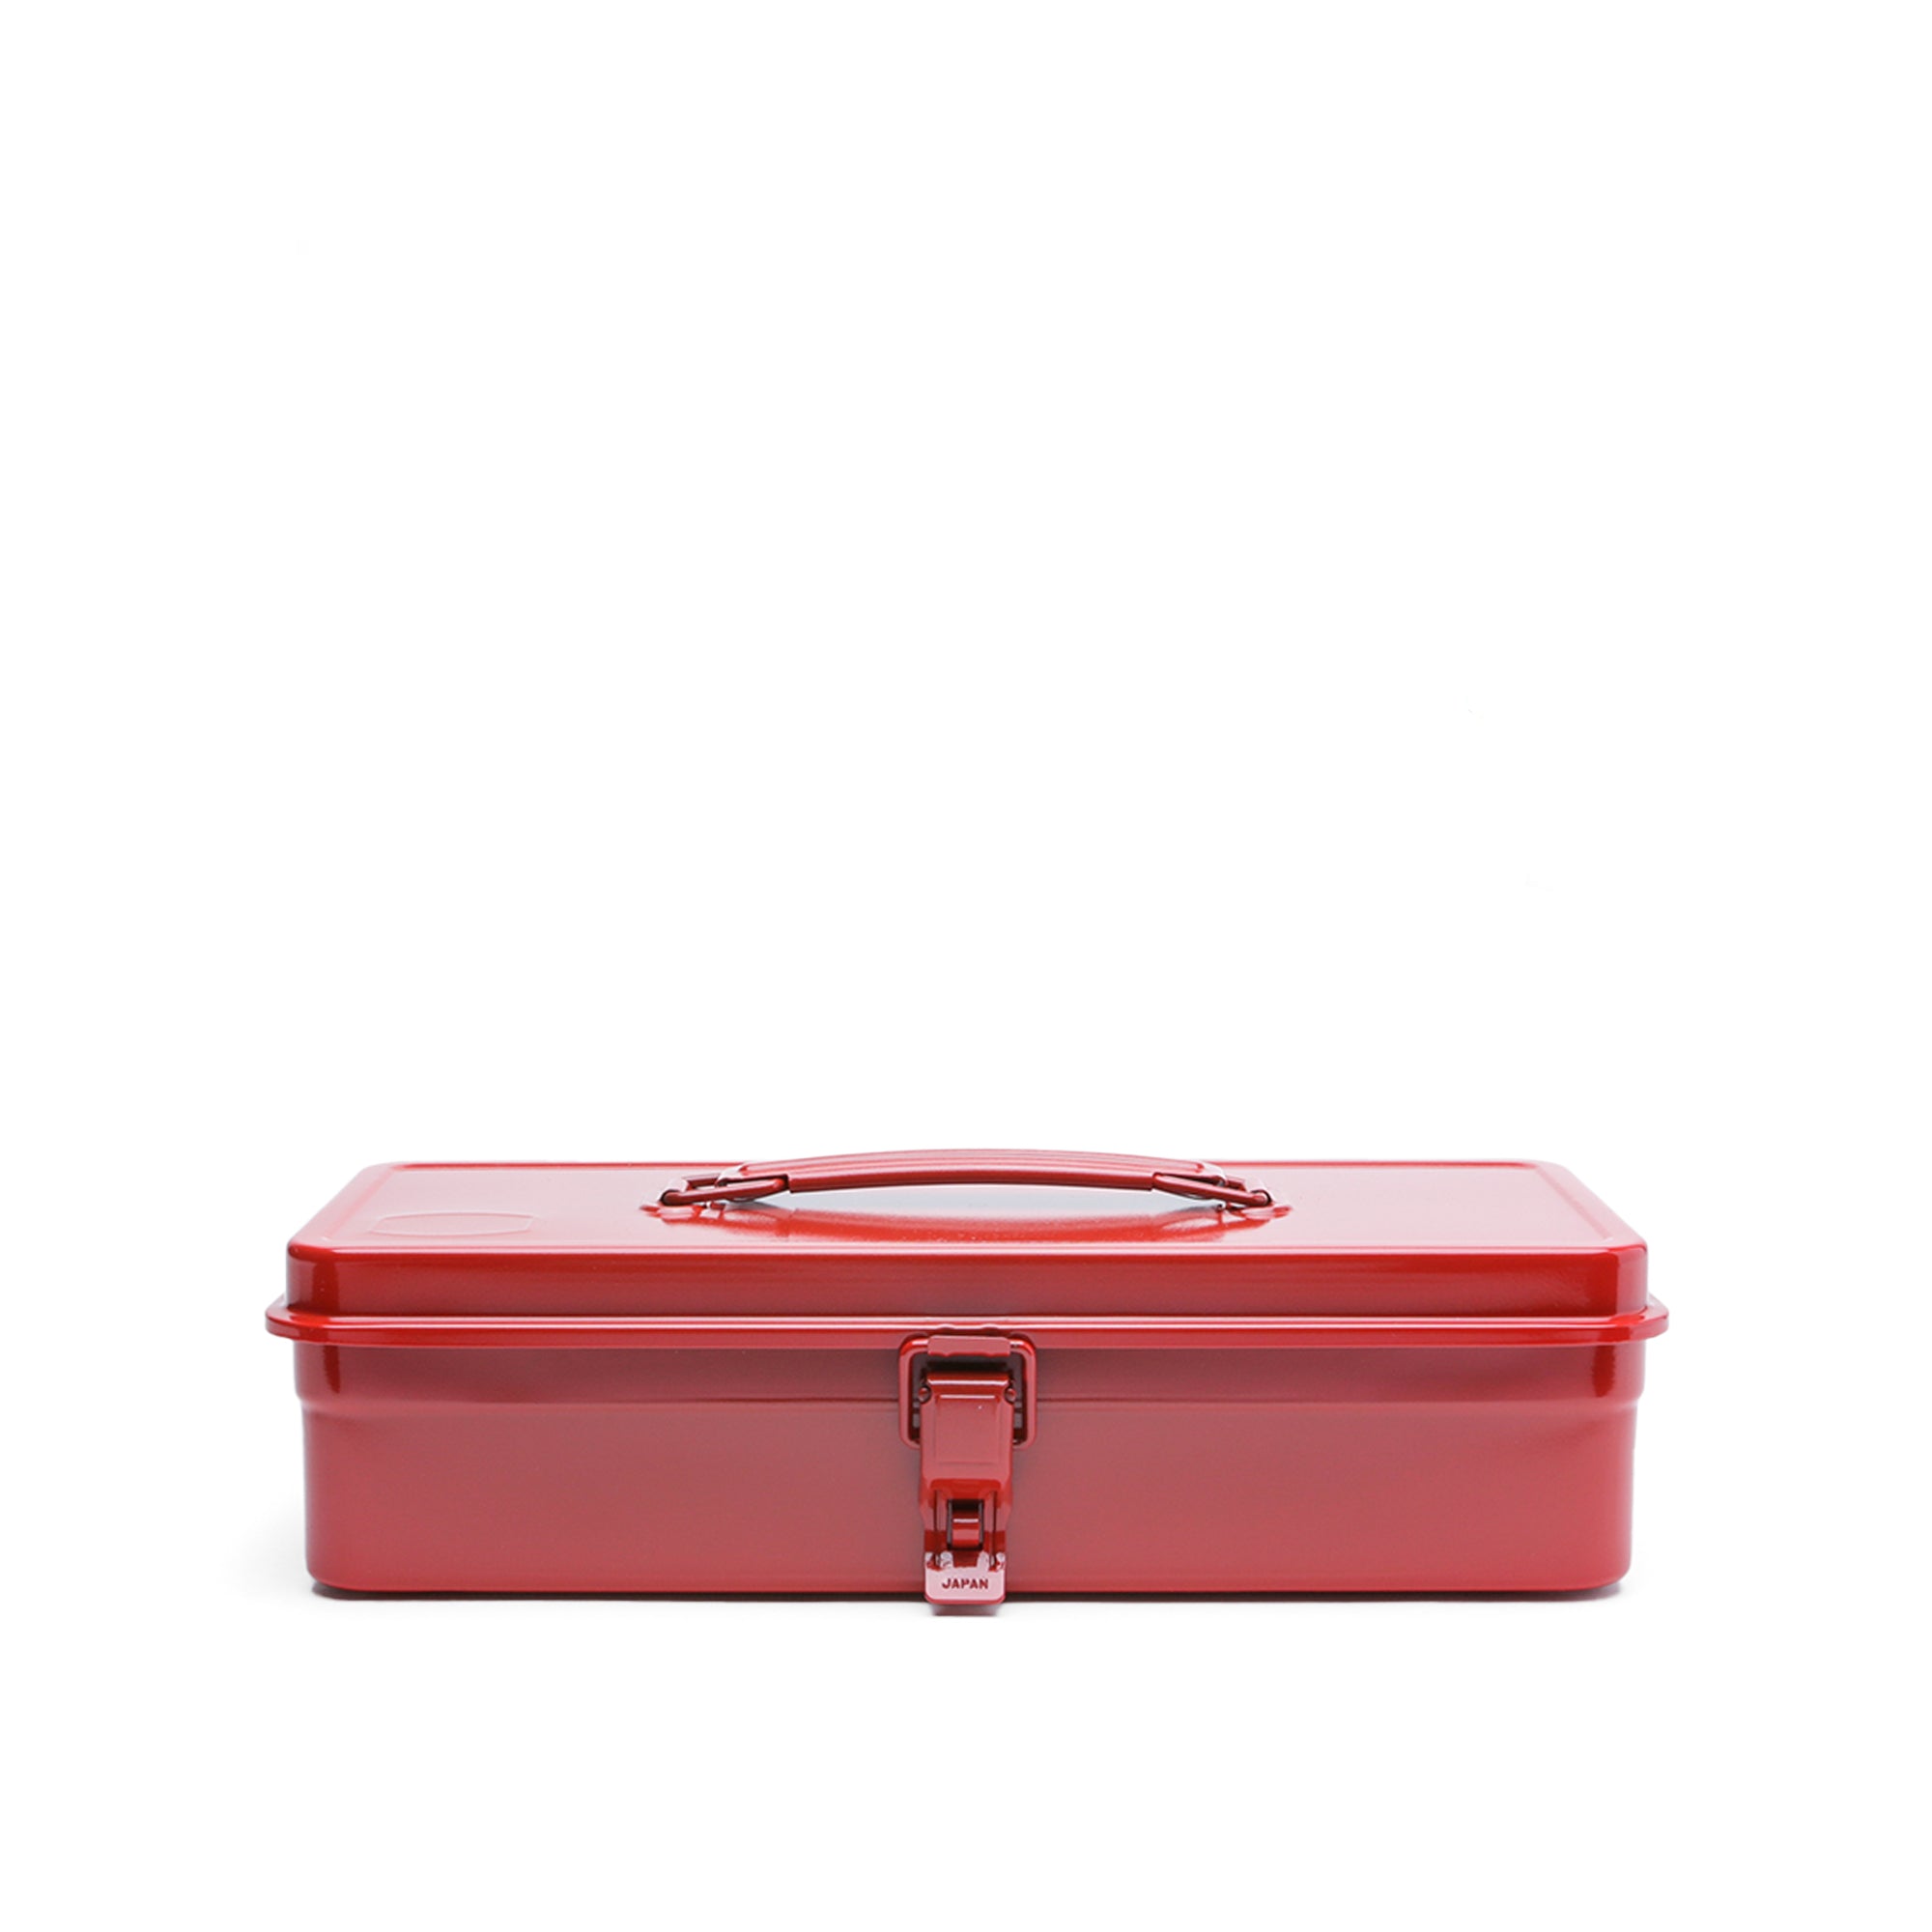 Y350 Camber Top Toolbox Pink